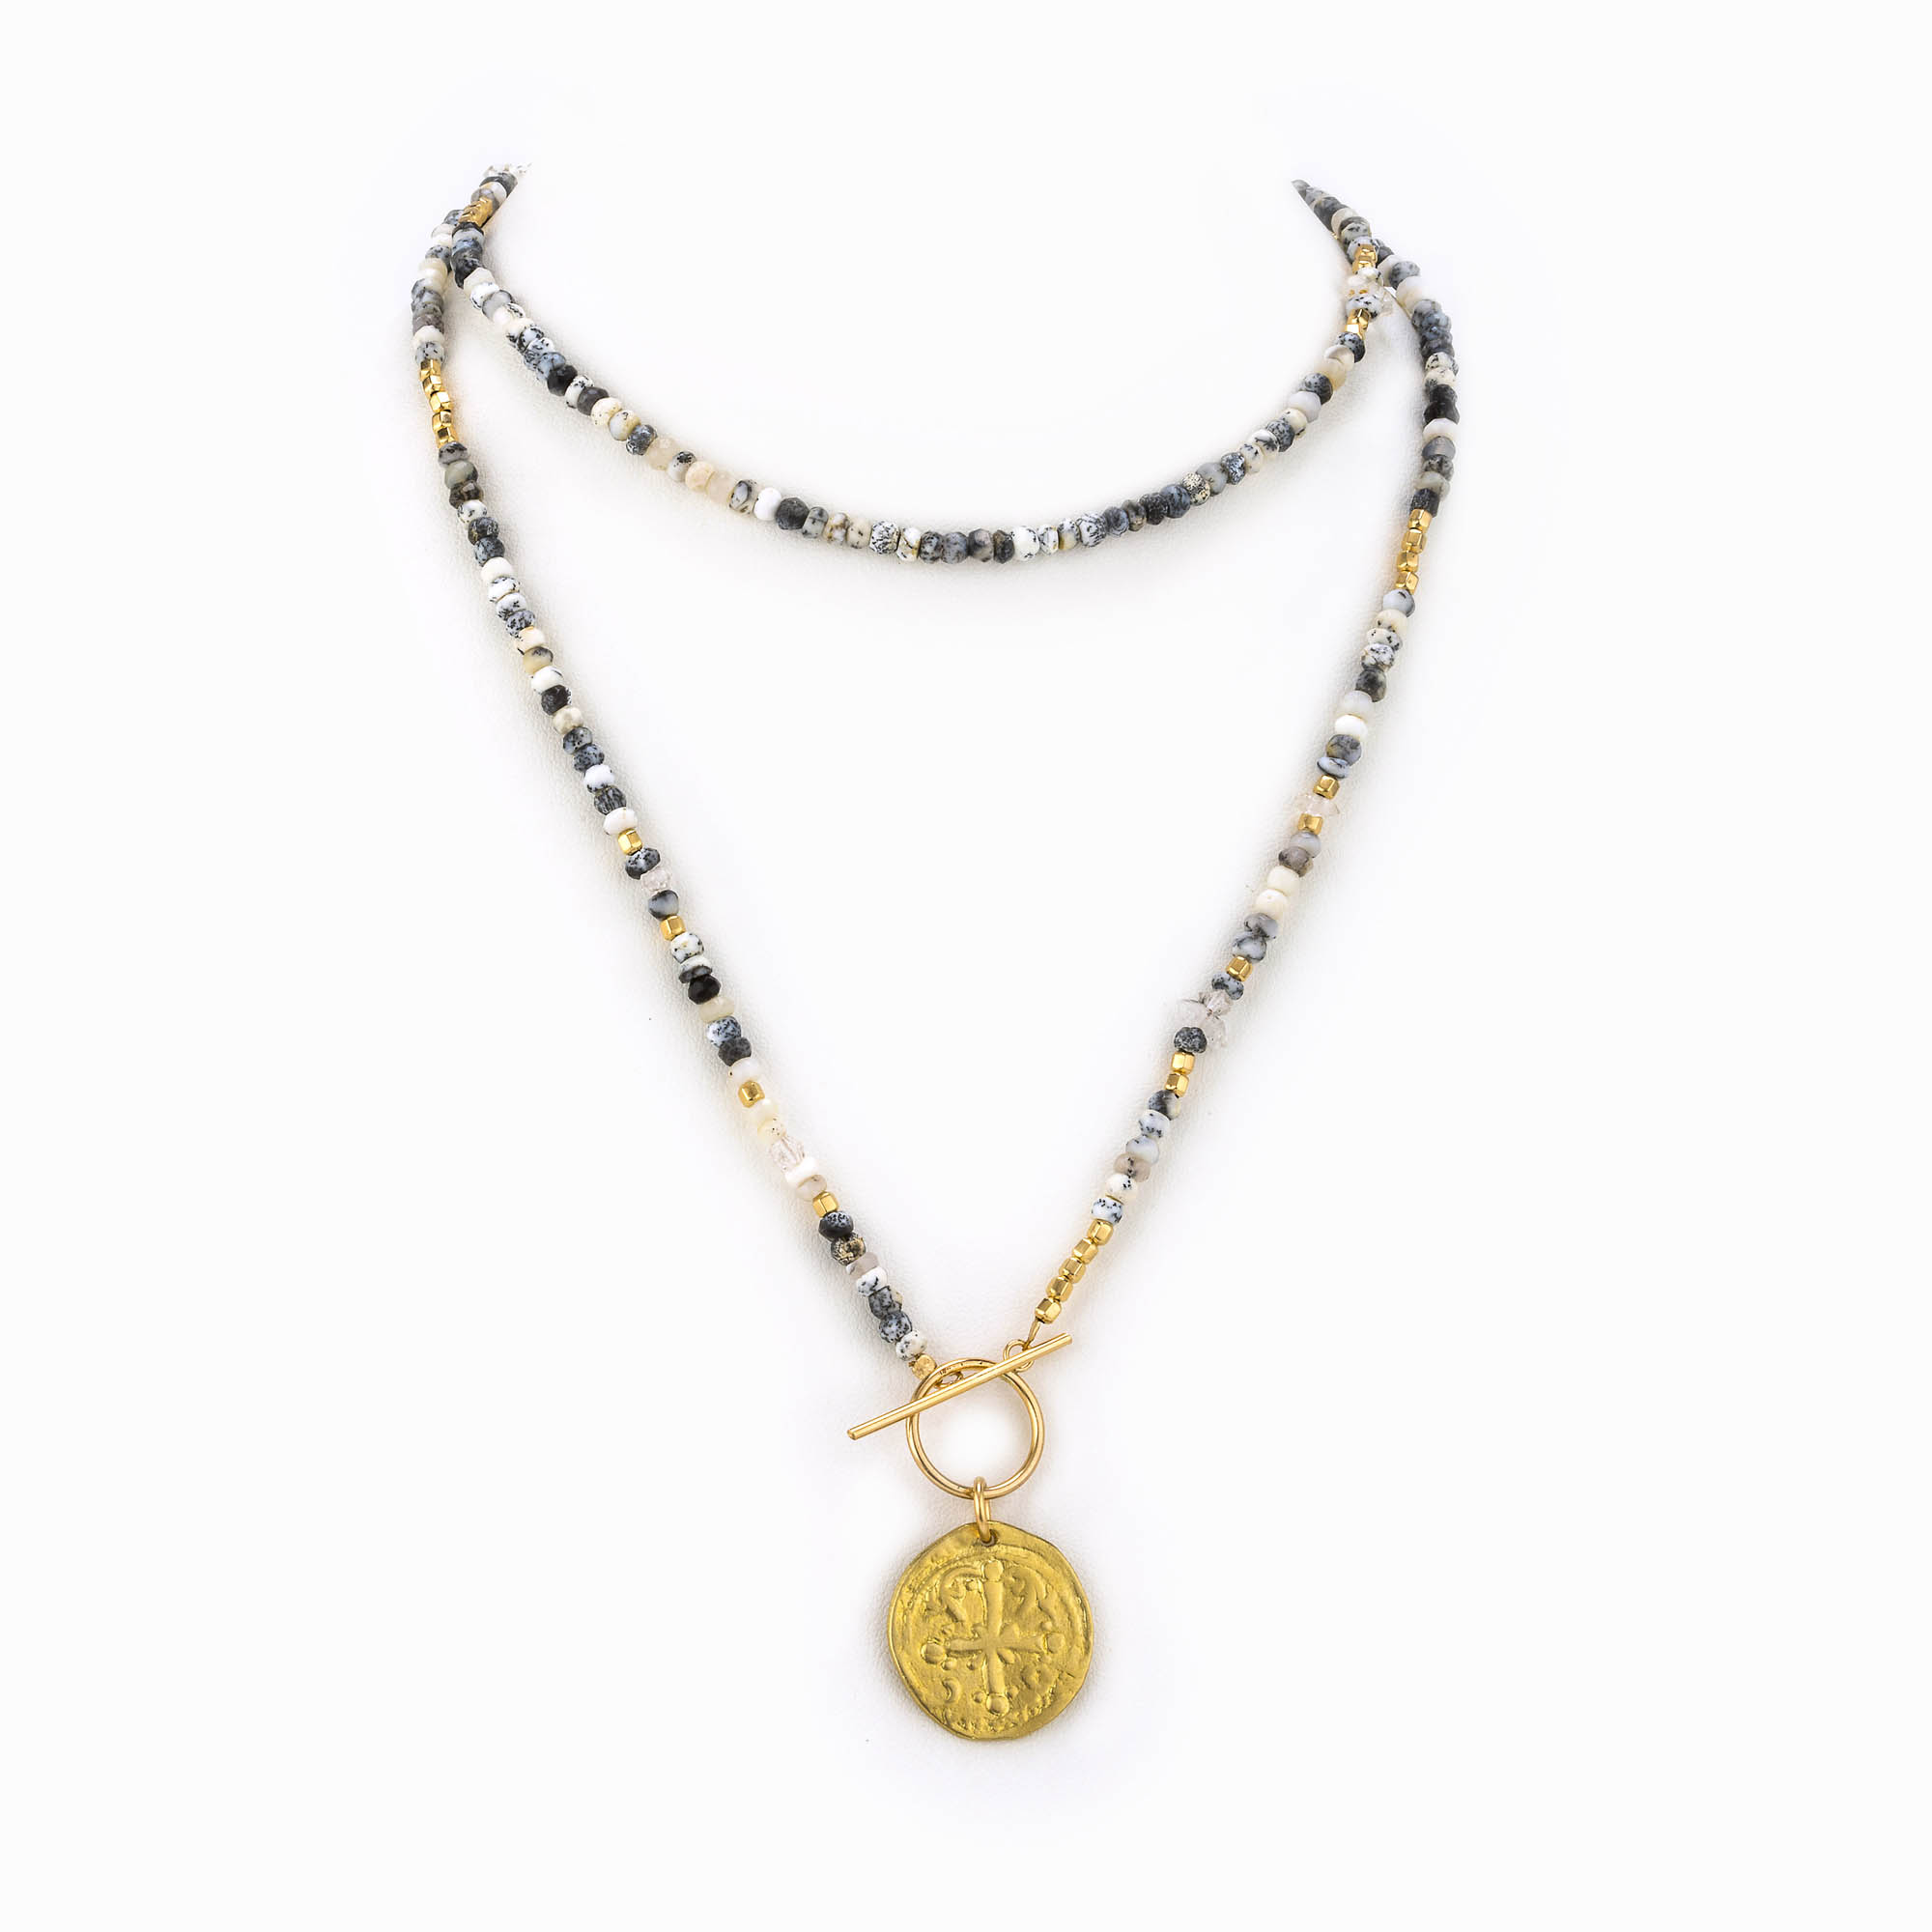 A necklace of multicolored grey and white agates, gold beads and Herkimer quartz with a brass antique coin.